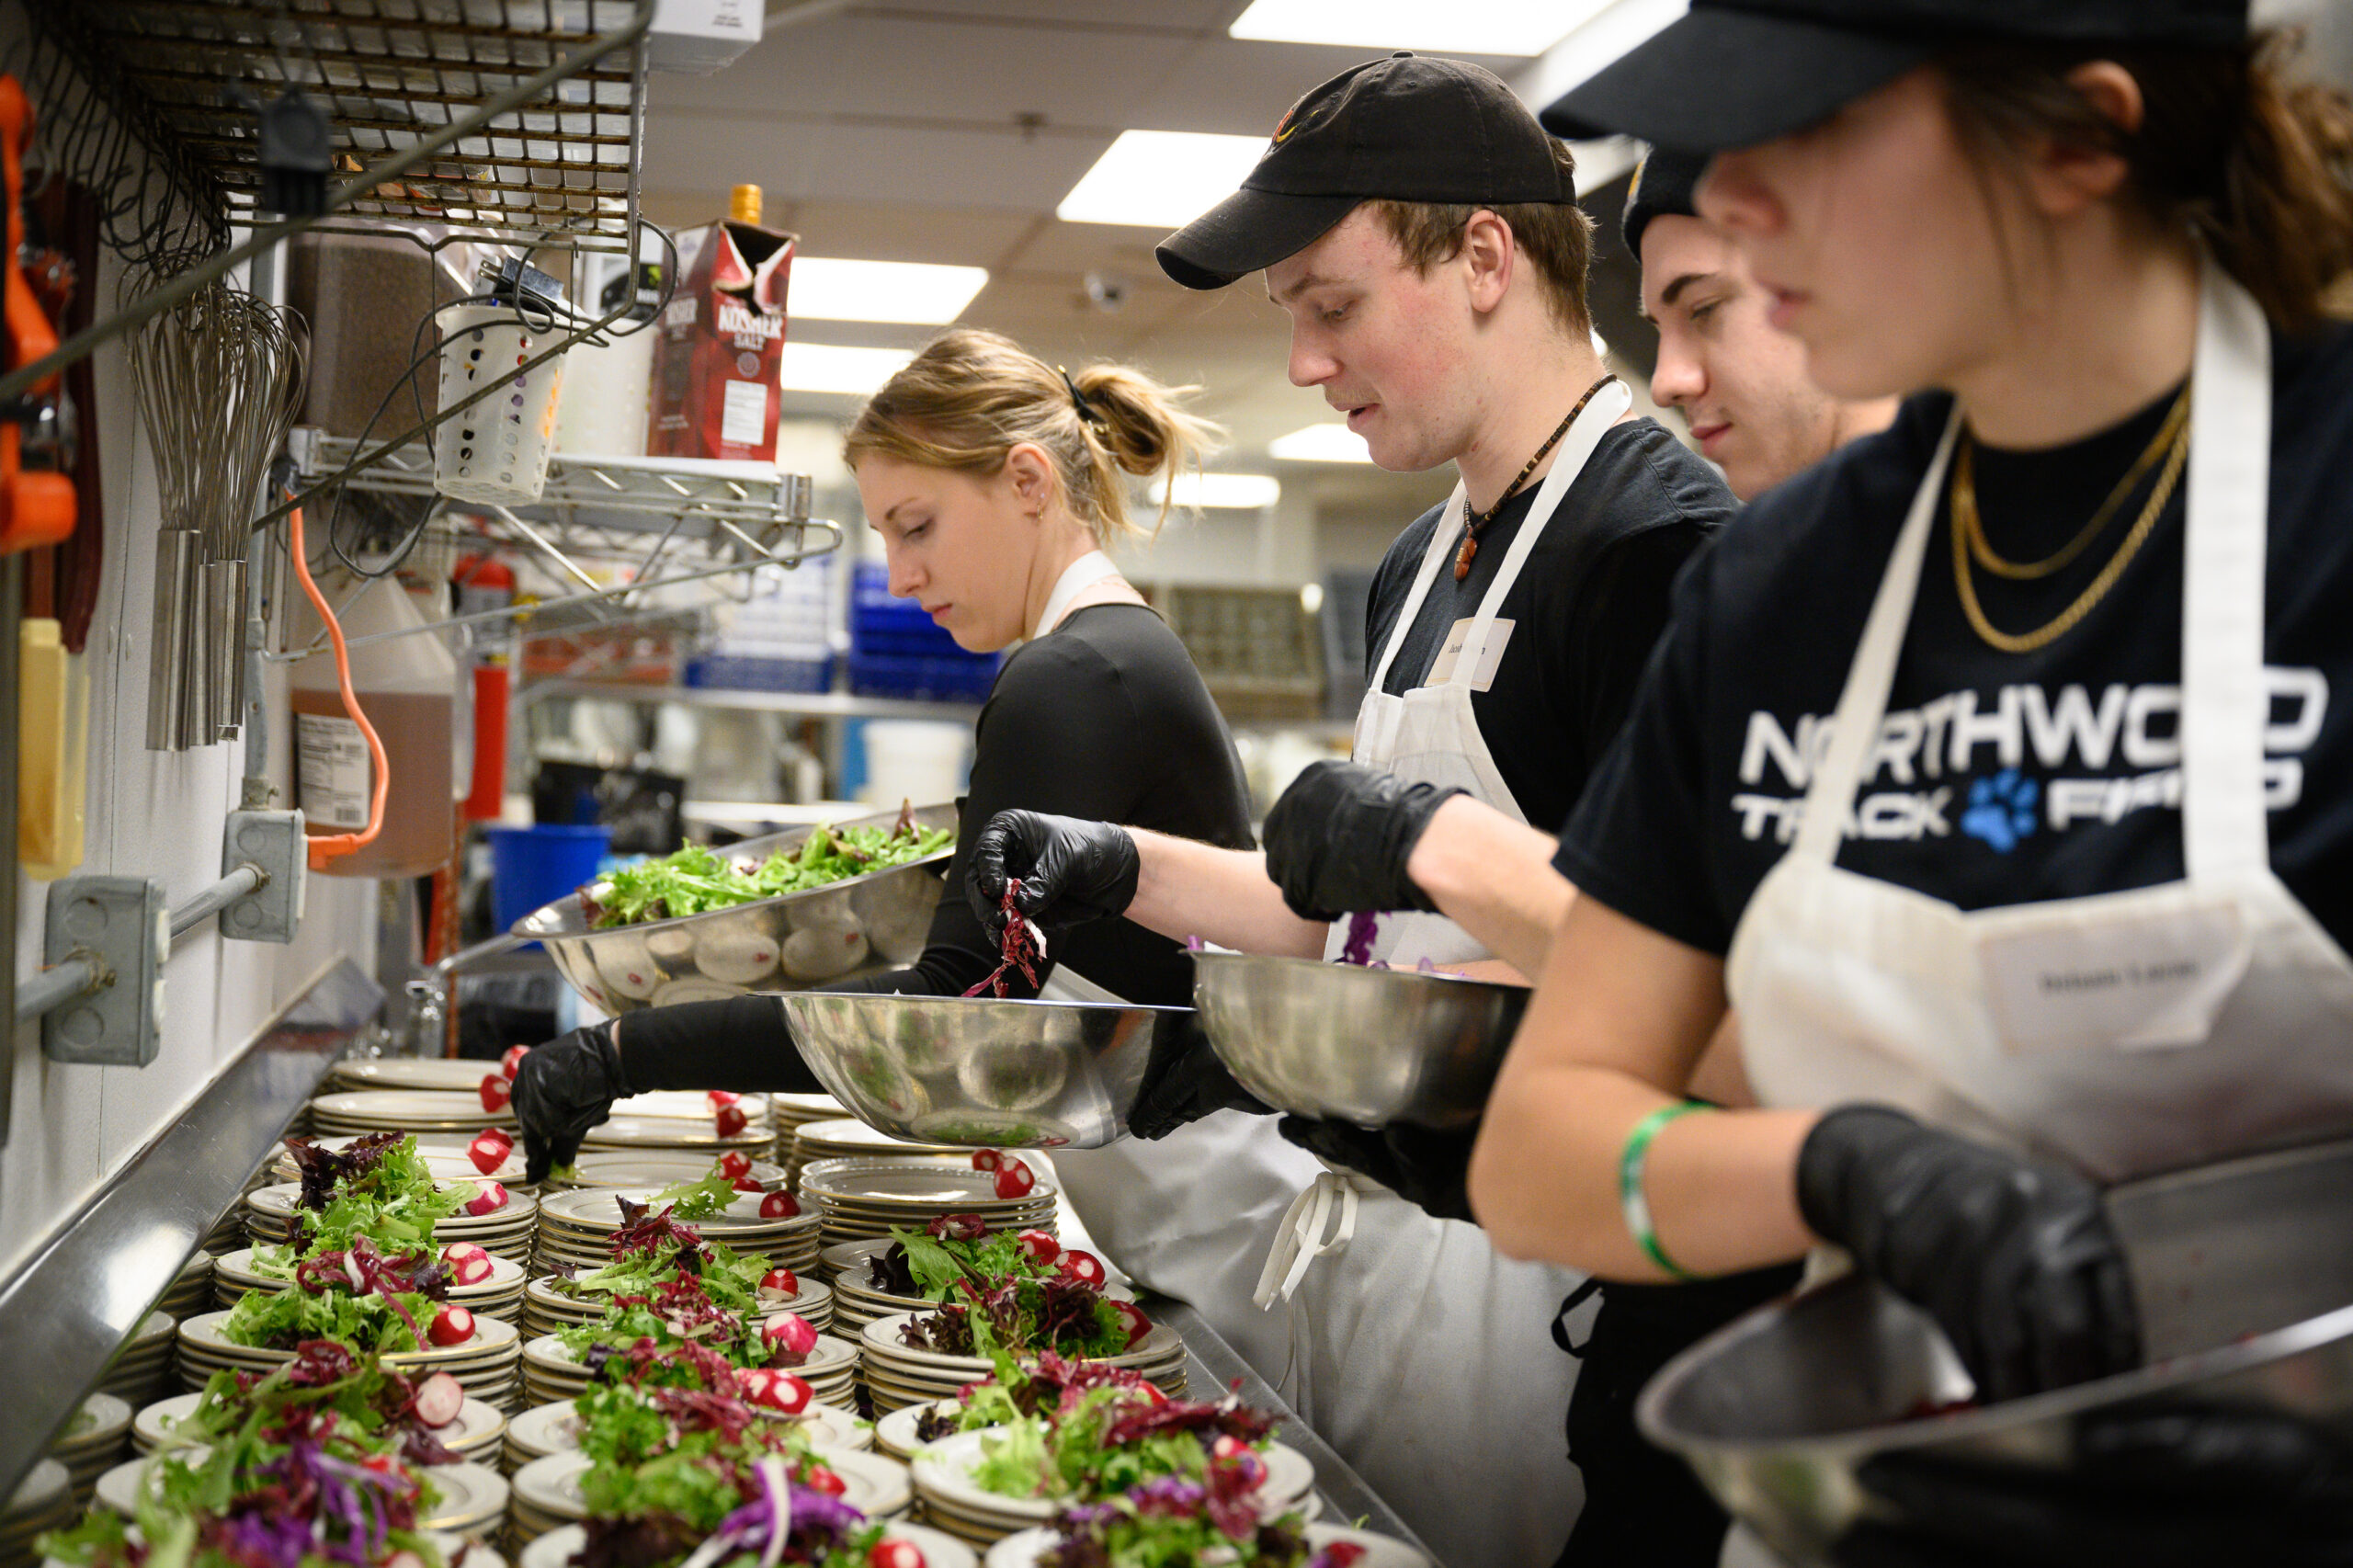 Students prepping food for the Stafford Dinner